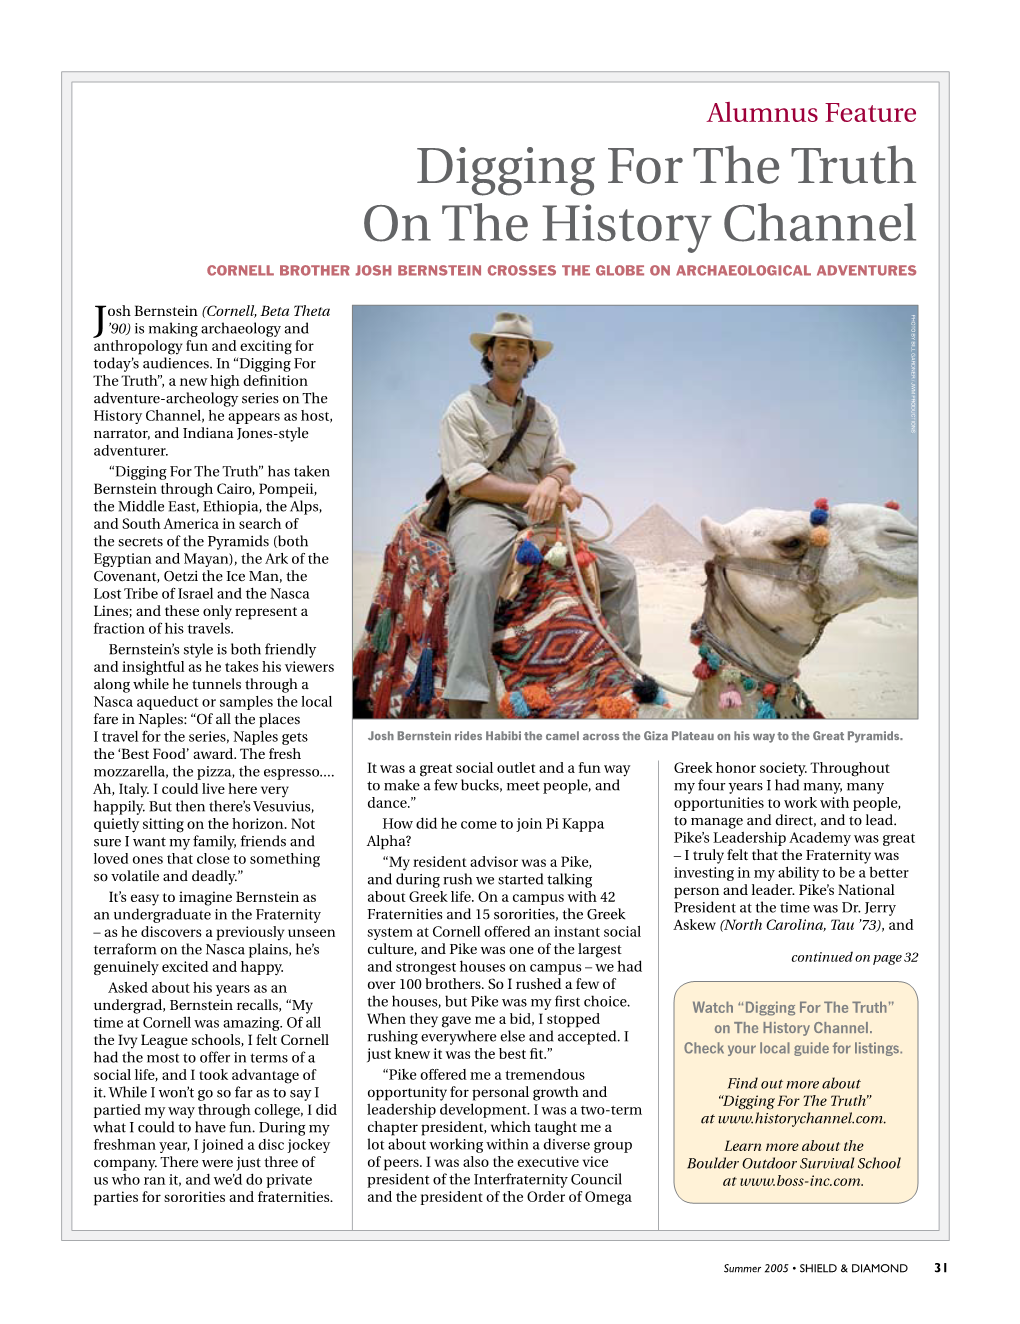 Digging for the Truth on the History Channel CORNELL BROTHER JOSH BERNSTEIN CROSSES the GLOBE on ARCHAEOLOGICAL ADVENTURES